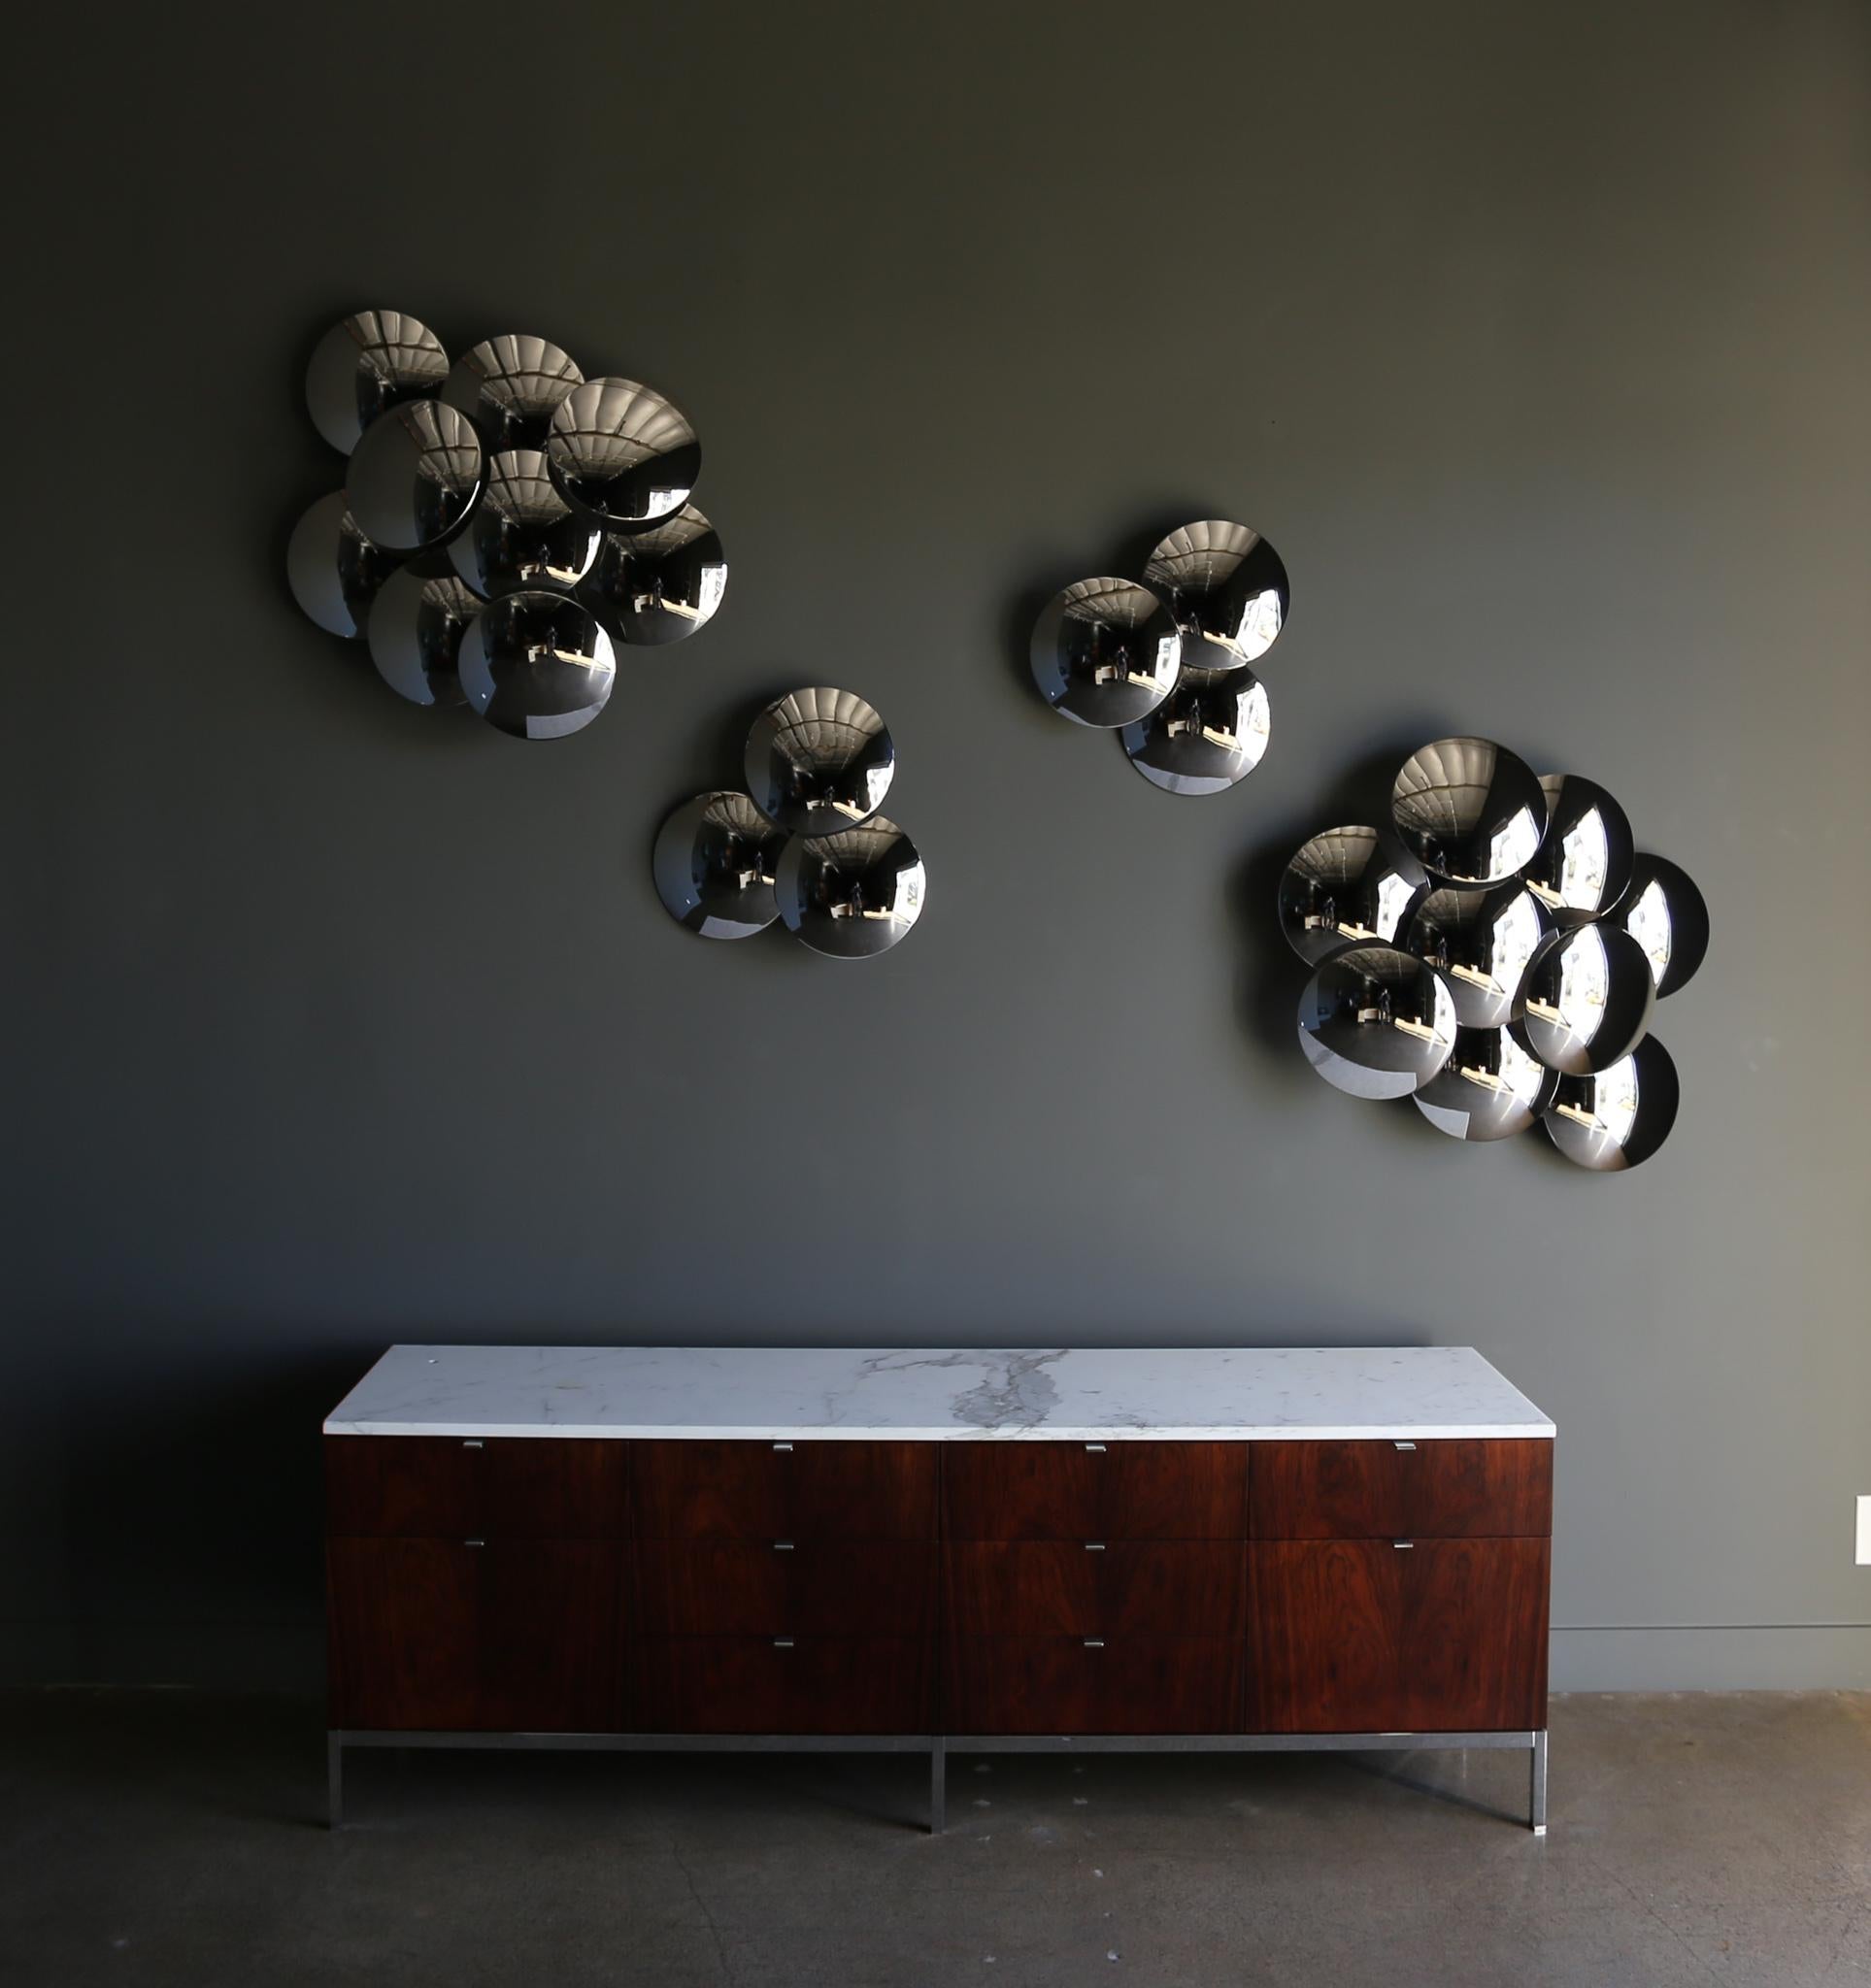 Goffredo Reggiani Sculptural Stainless Steel Sconces Set for Reggiani, Italy, Circa 1970. 

The large examples have nine polished stainless steel disk each and measures: 31